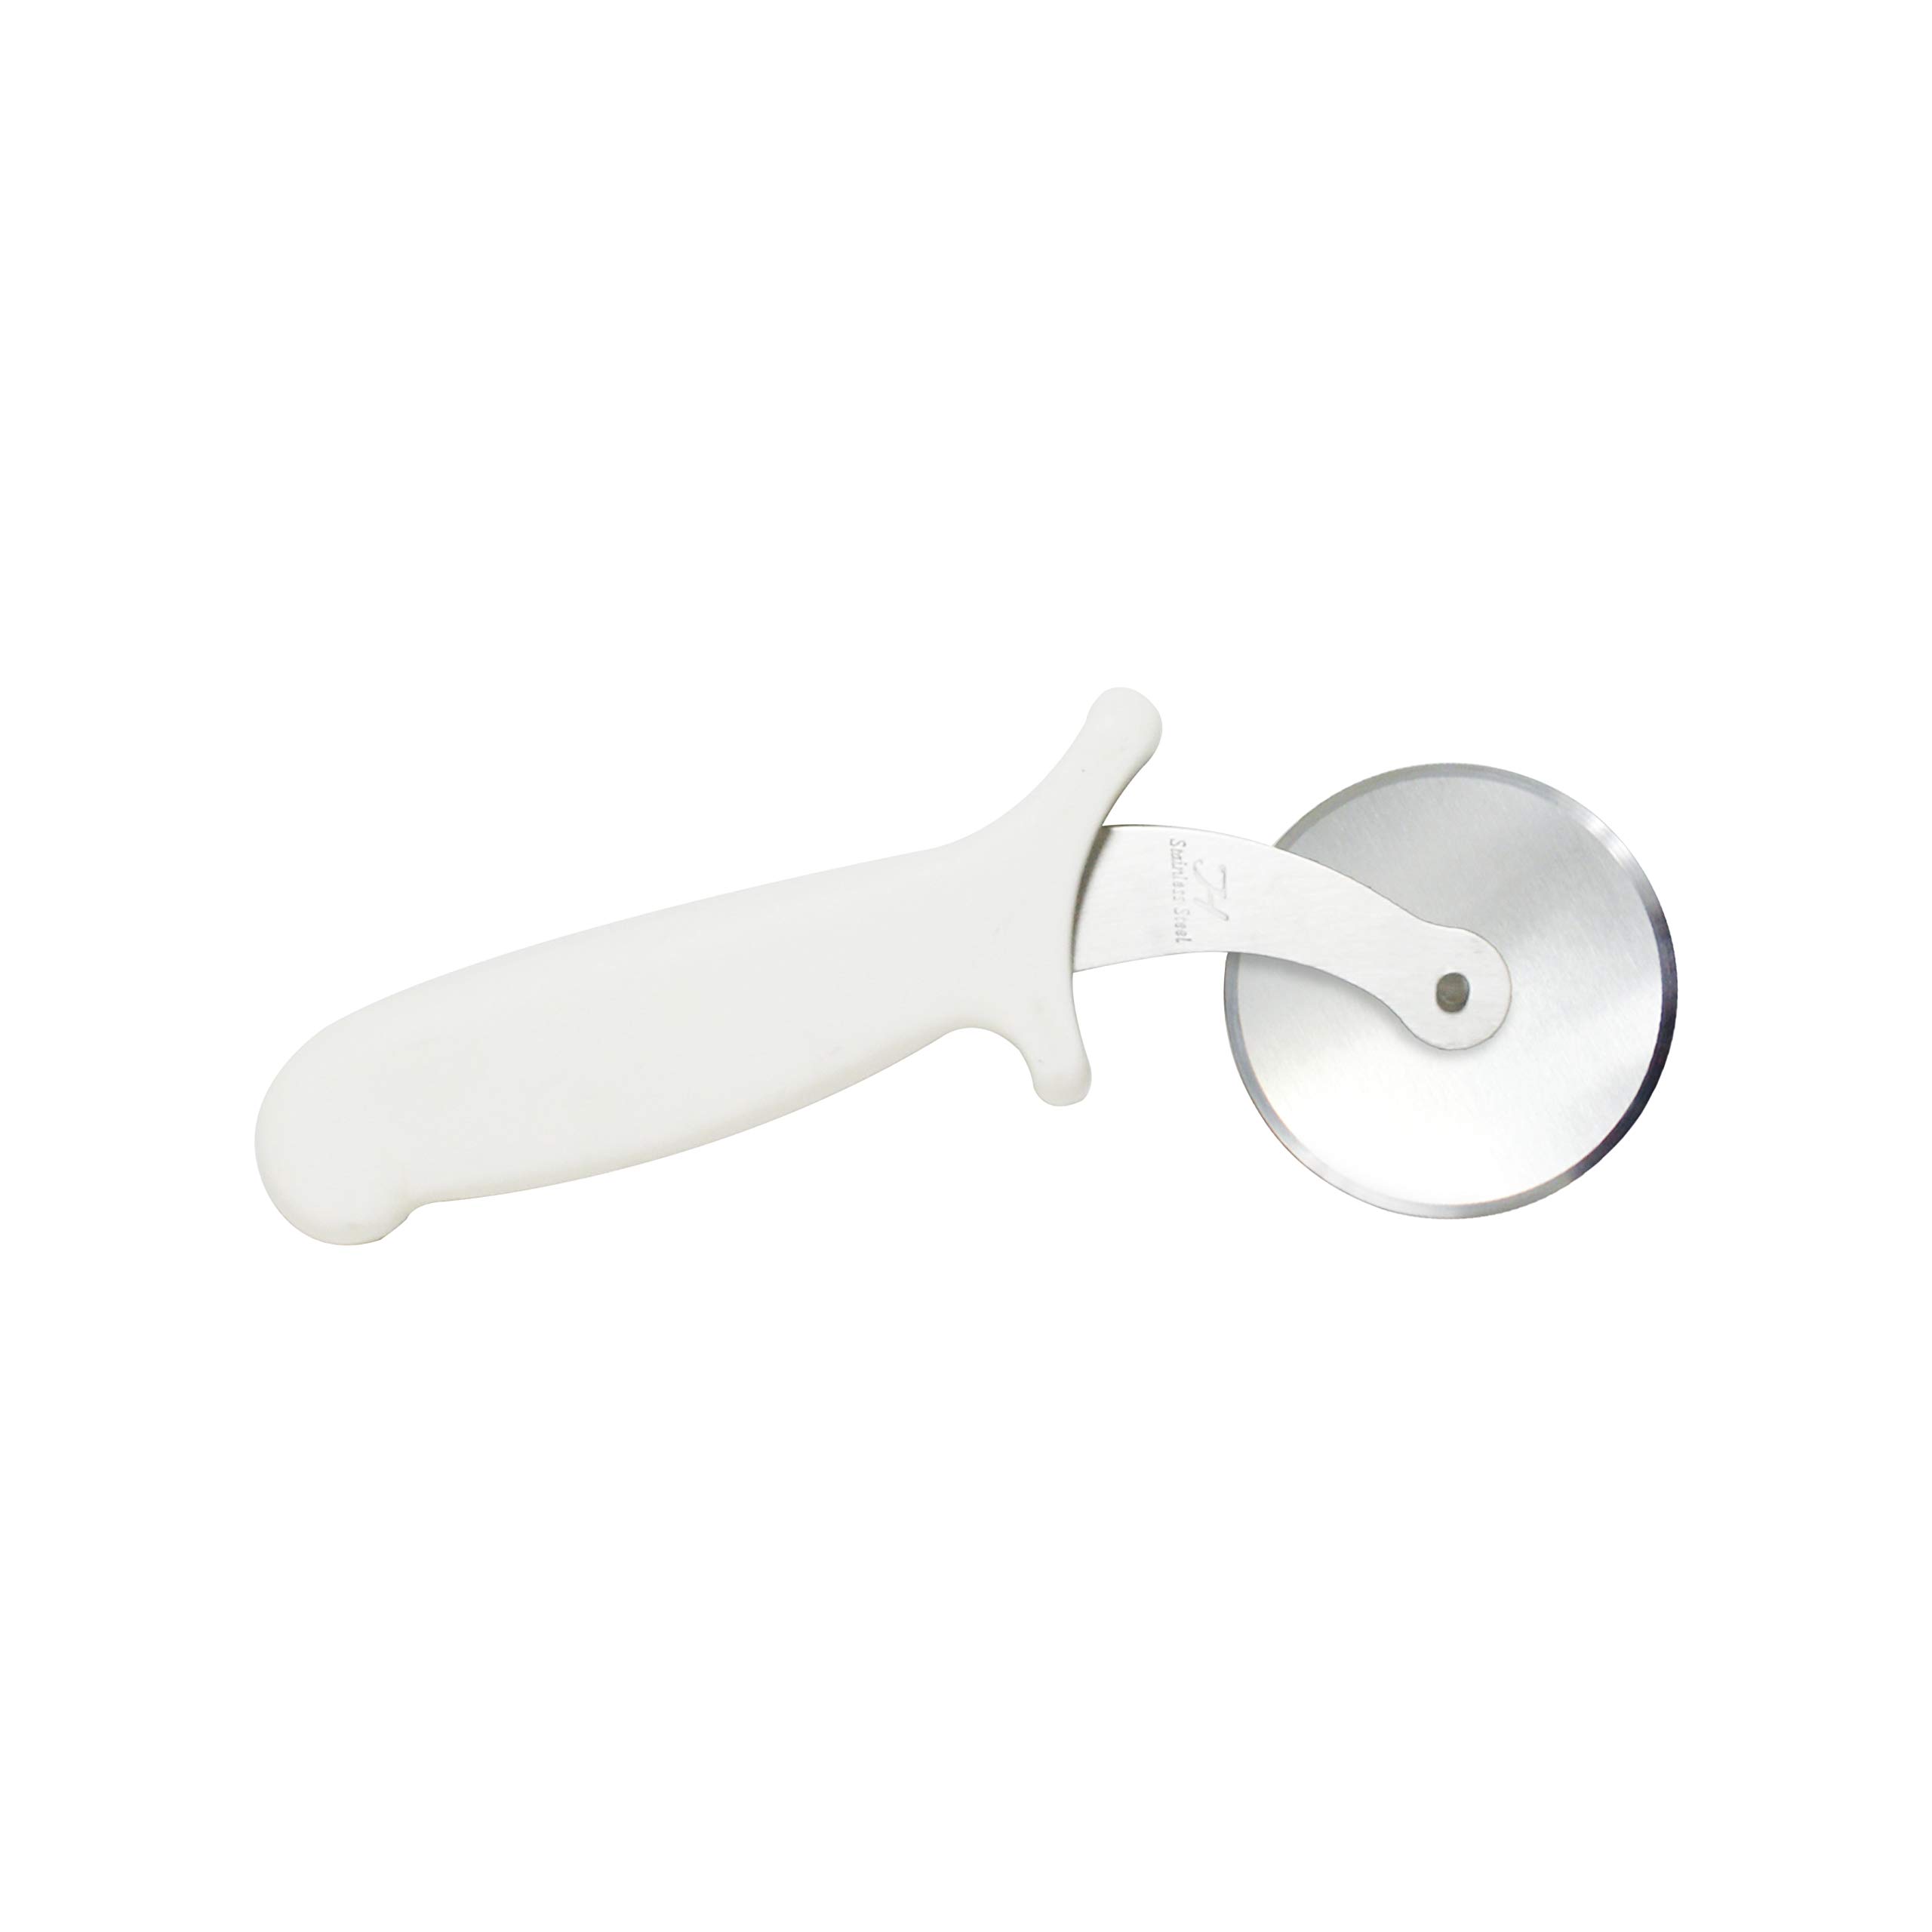 Thunder Group , 2-1/2-Inch Pizza Cutter, Pizza Slicer, Pizza Wheel with White Handle, Cutting Pizza Knife